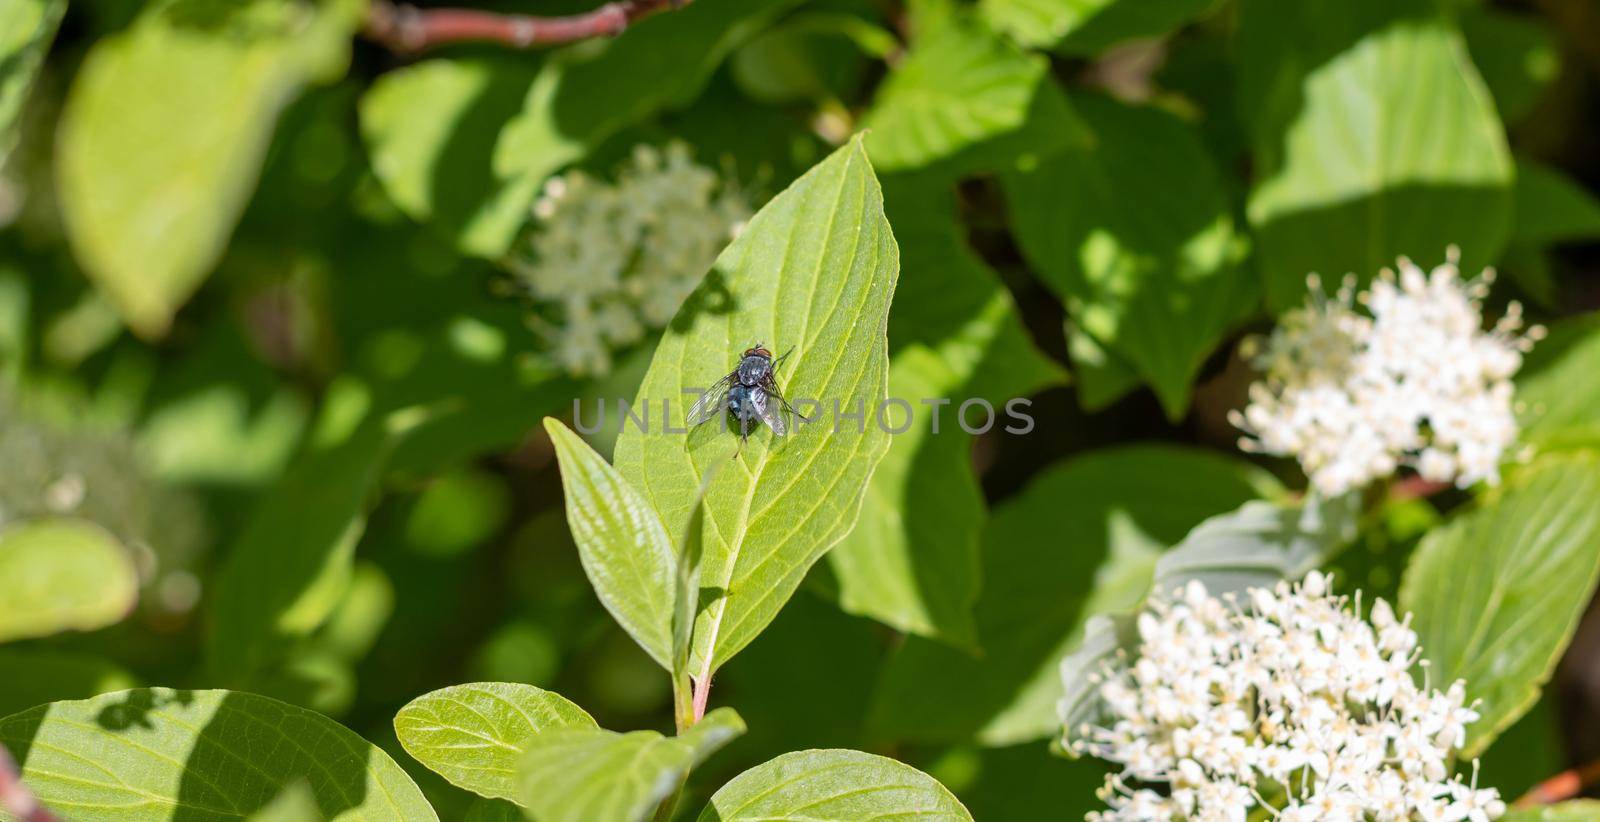 An ordinary blue fly sits on a green leaf close-up by lapushka62